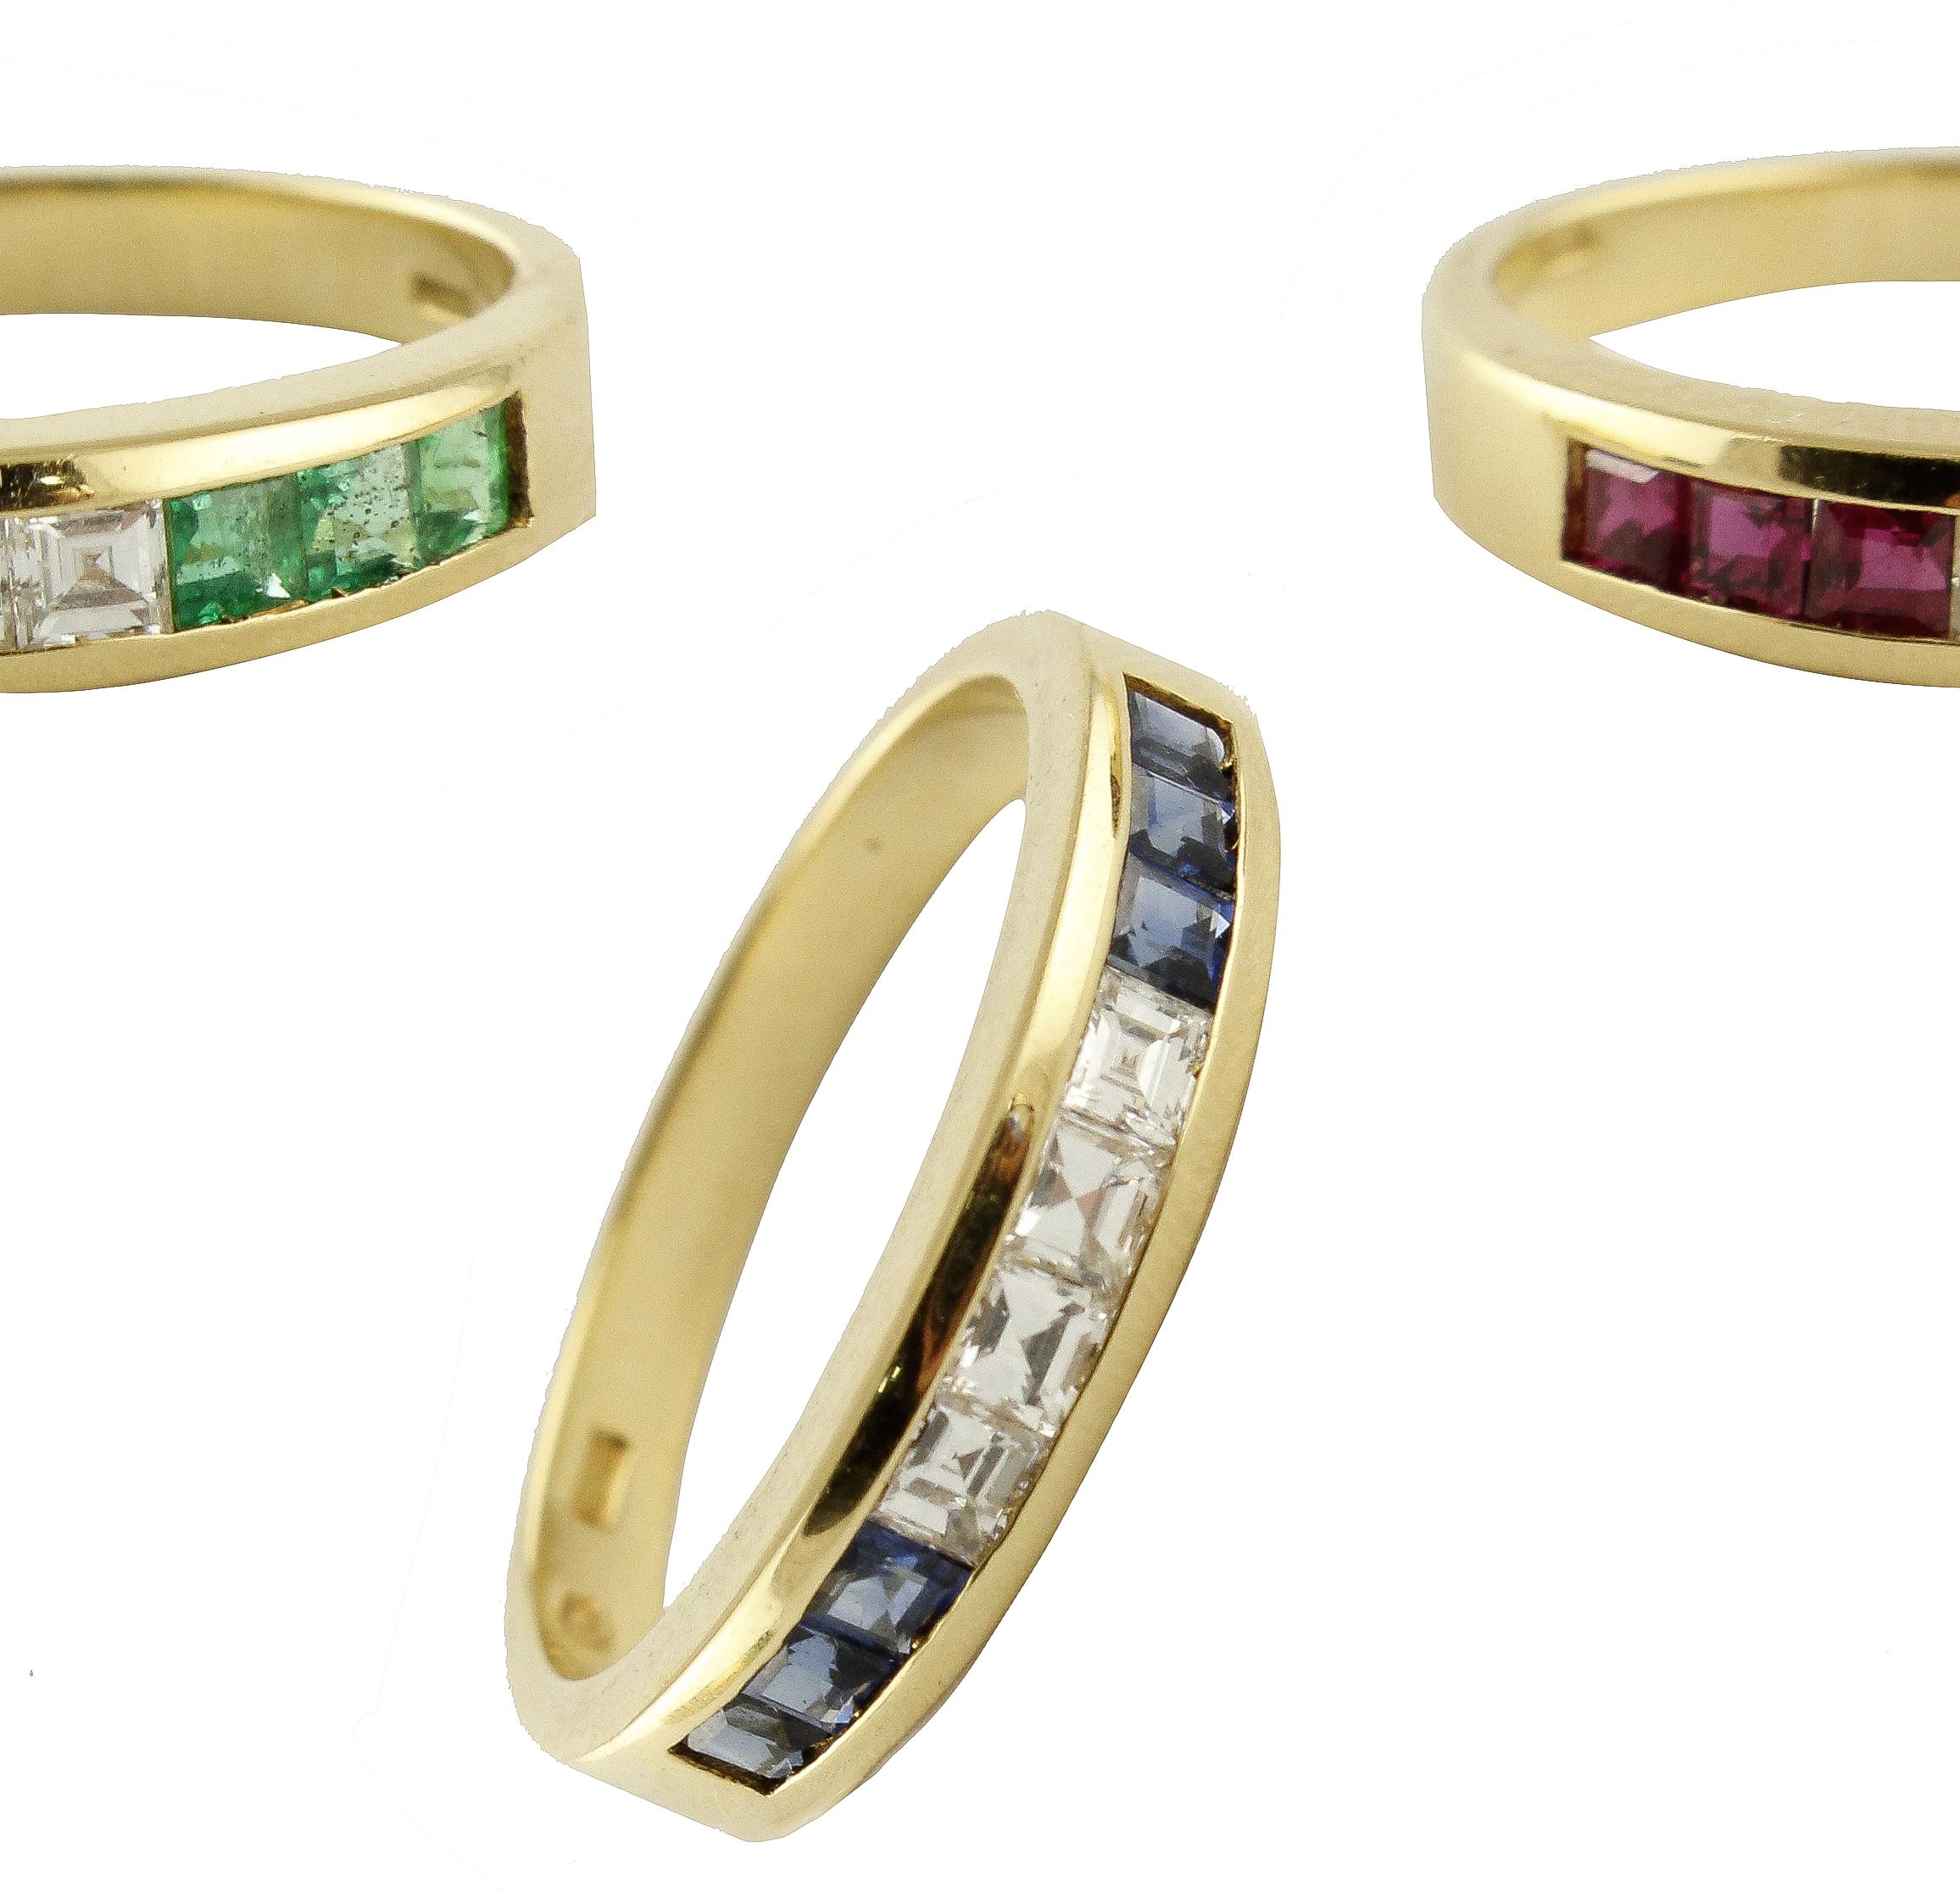 SHIPPING POLICY:
No additional costs will be added to this order.
Shipping costs will be totally covered by the seller (customs duties included).

Fabulous 3 band rings in 18 kt yellow gold, to wear all three together or even individually, each band